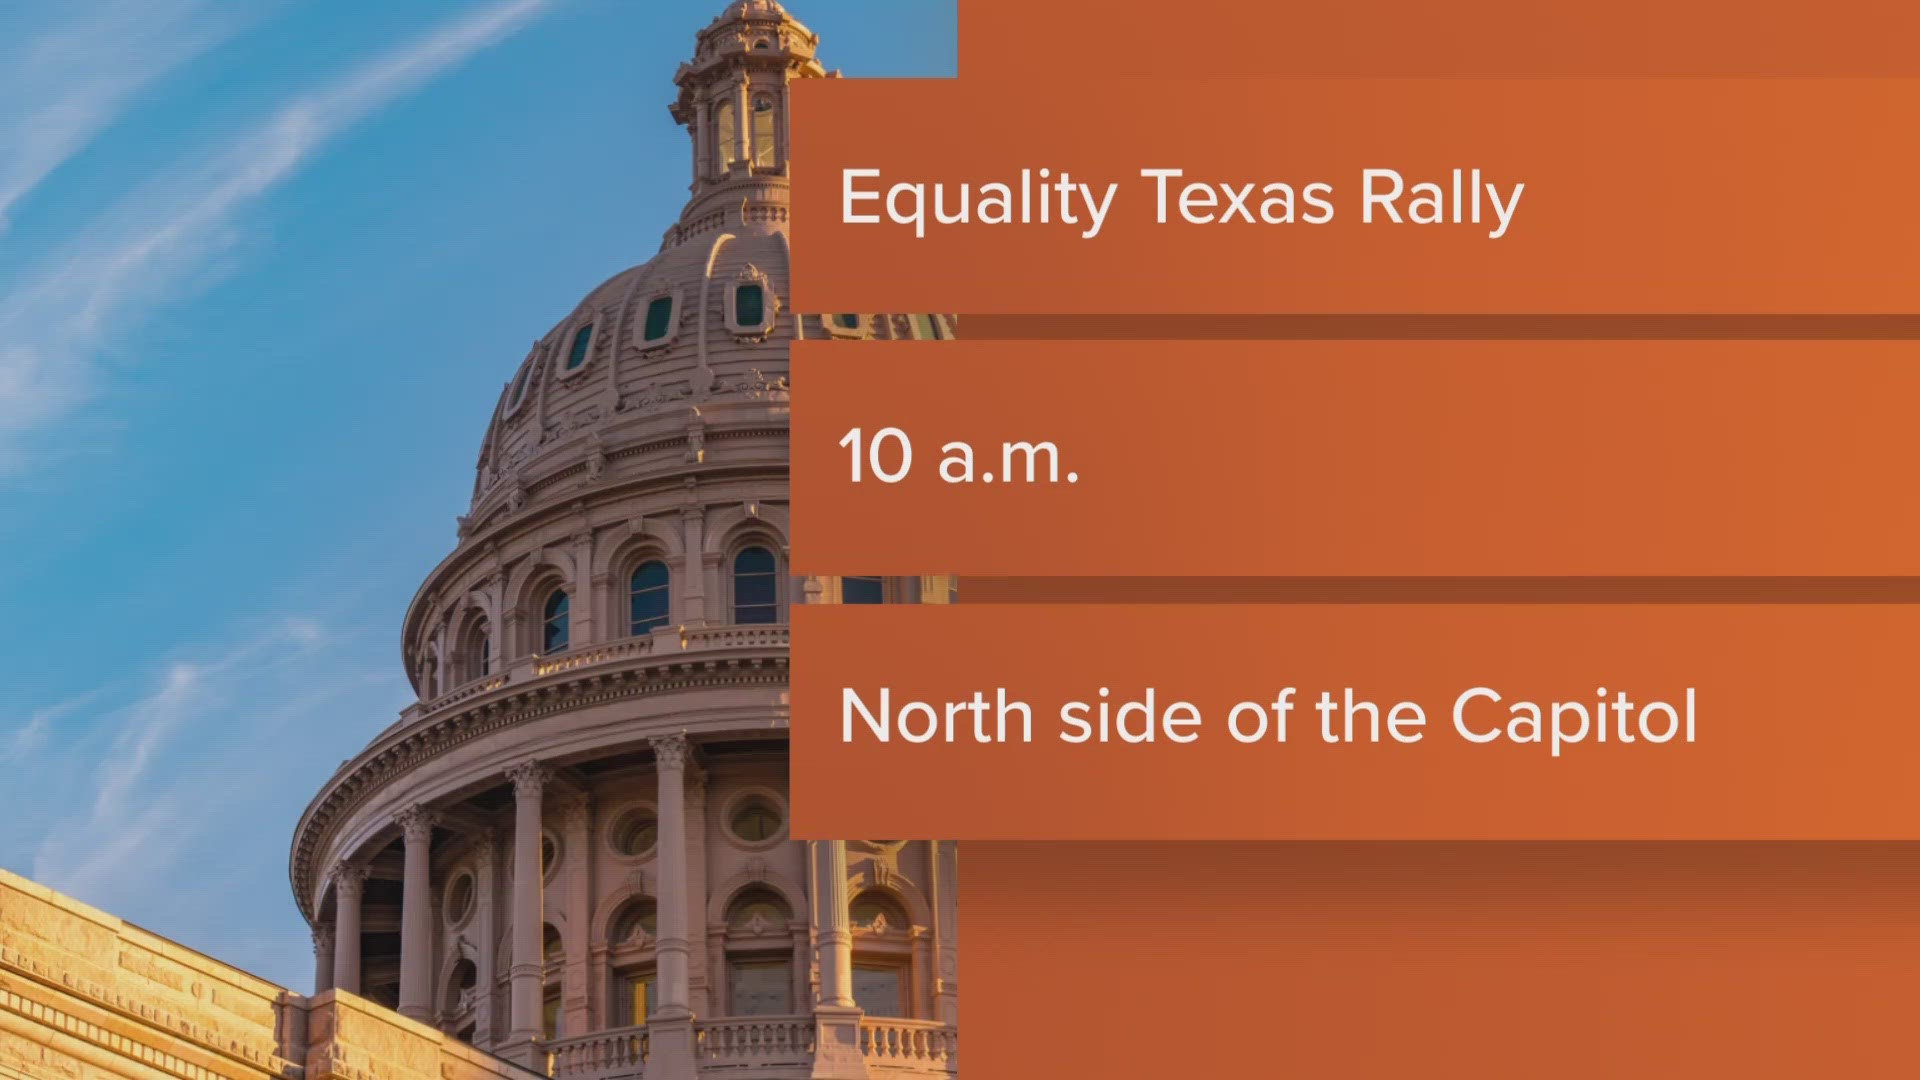 Equality Texas will hold a rally at the Texas State Capitol. The group plans to speak out against anti-transgender legislation that will be debated on Thursday.